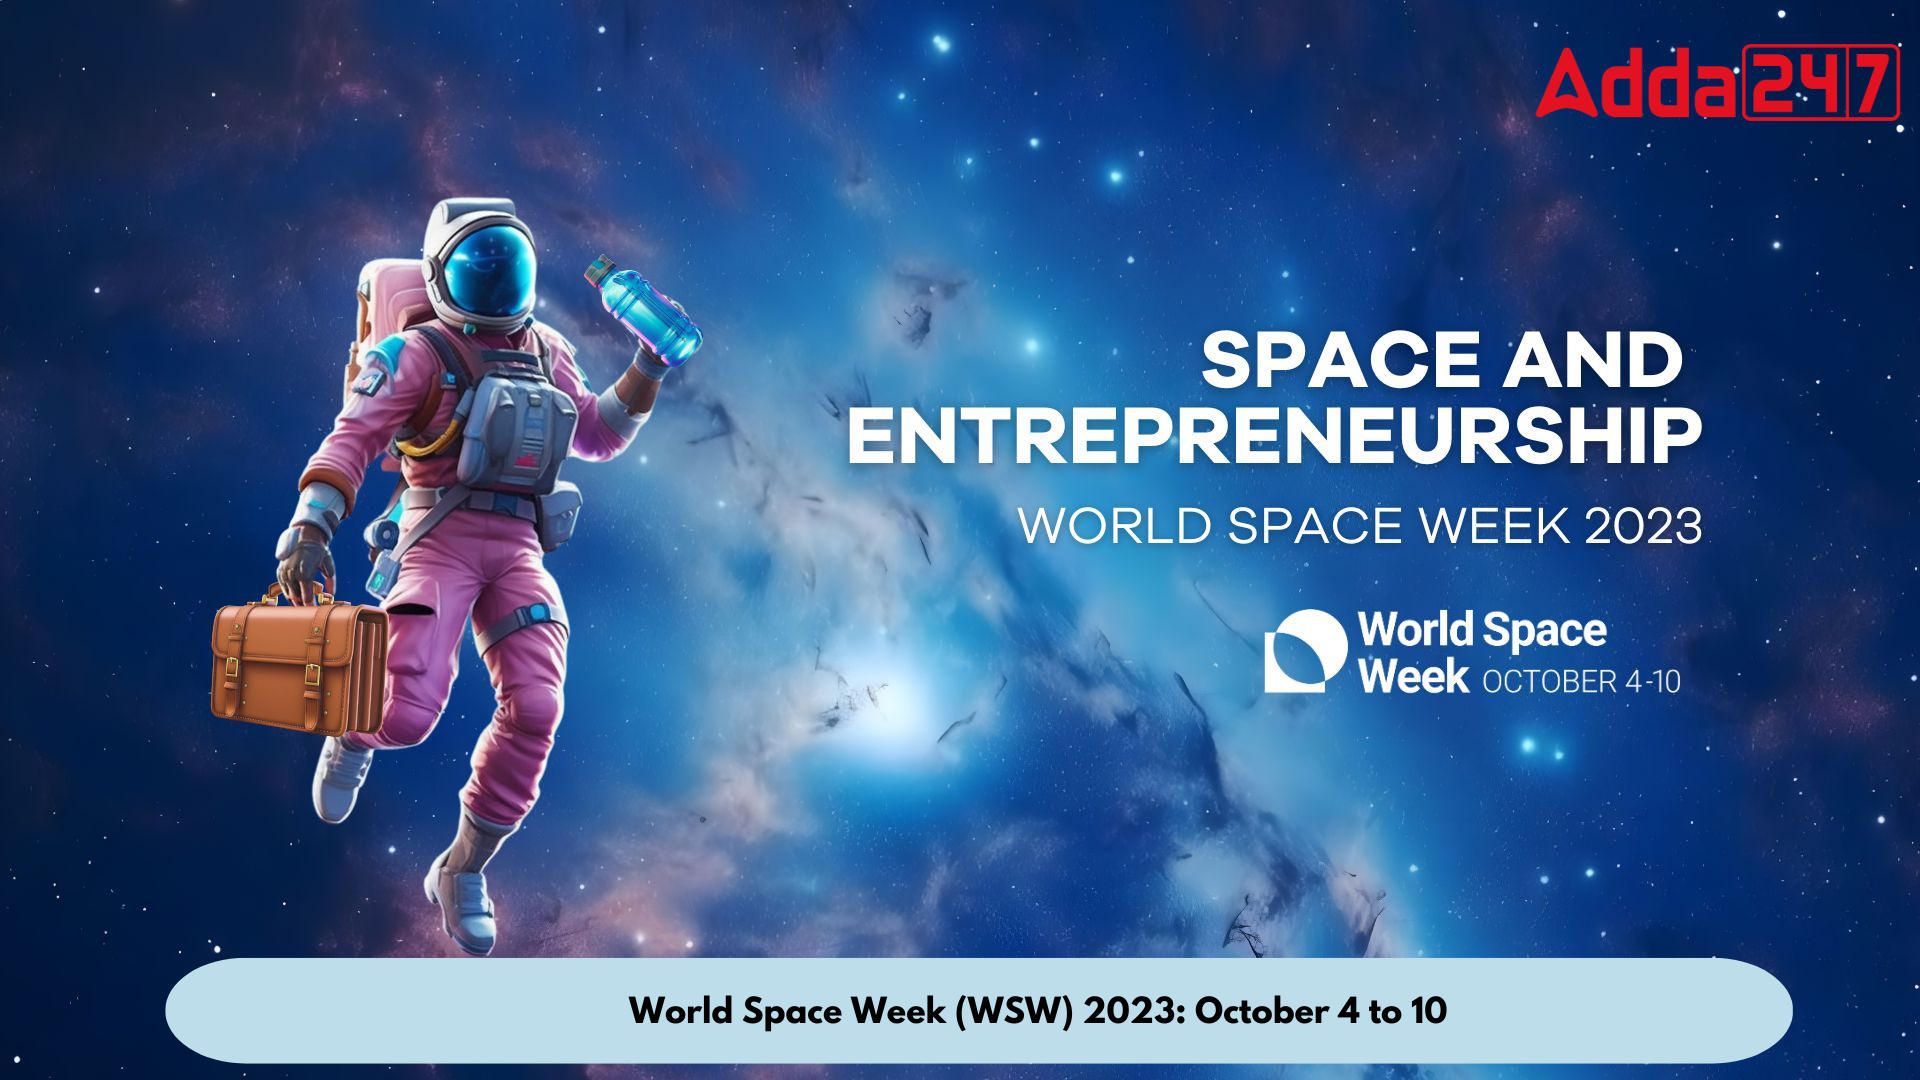 World Space Week (WSW) 2023